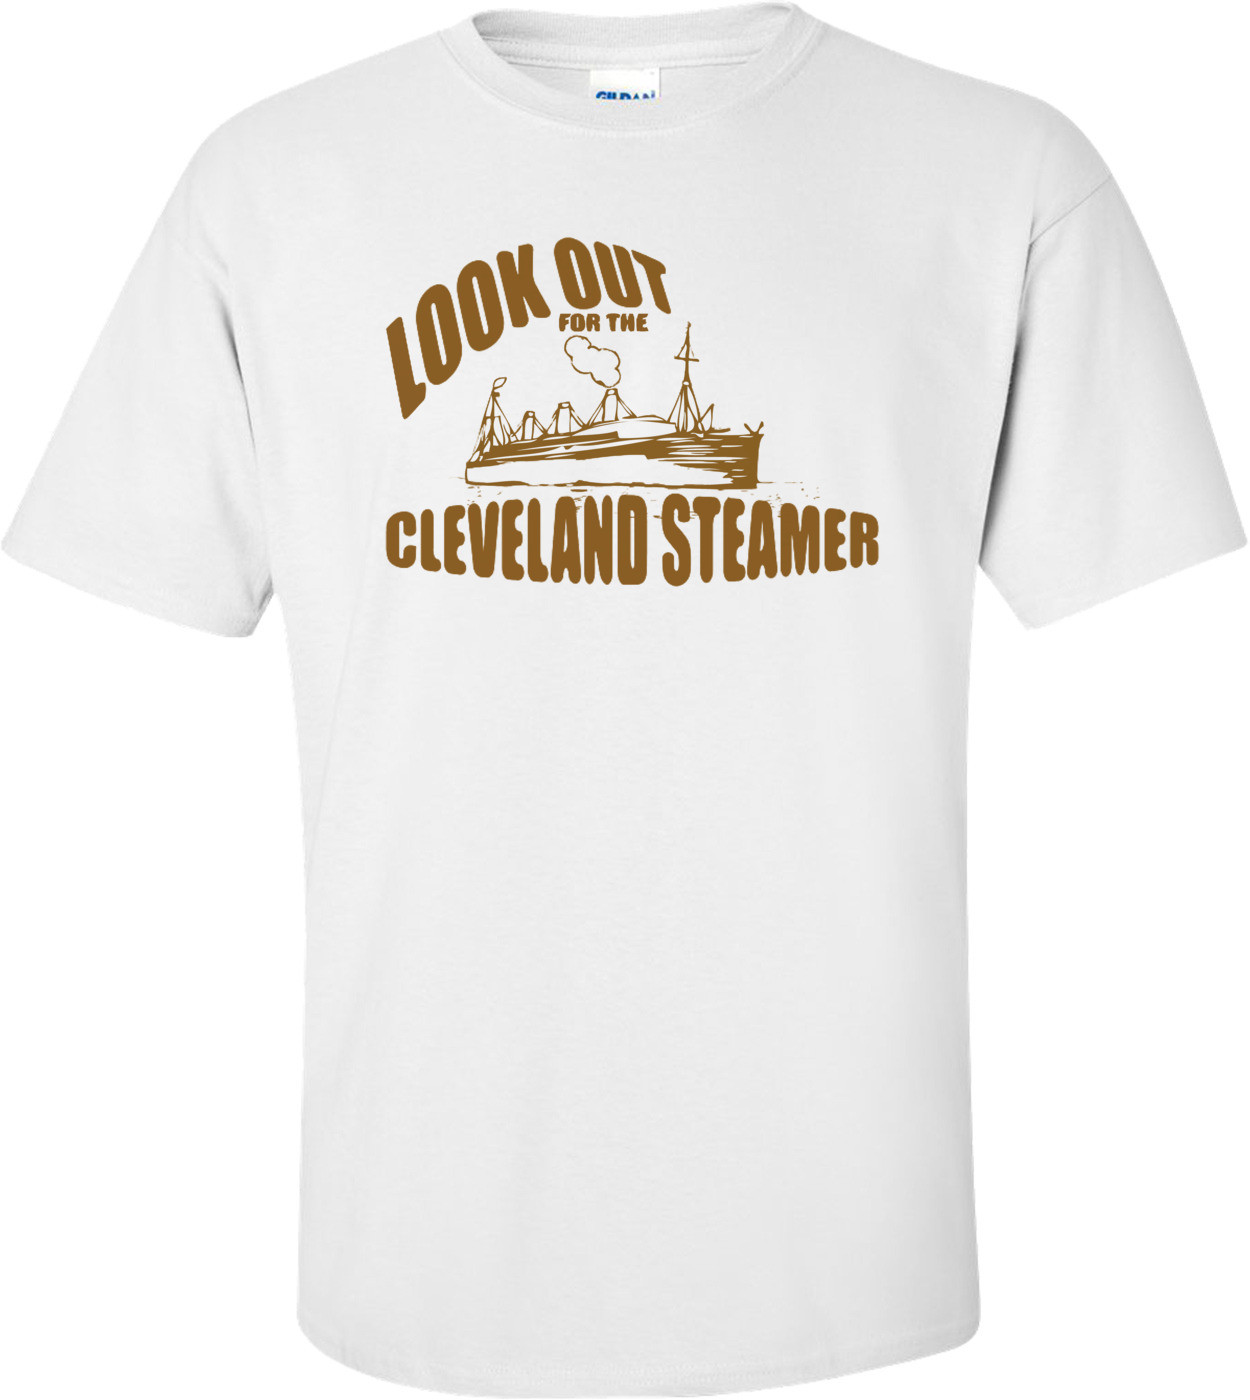 Look Out For The Cleveland Steamer T-shirt